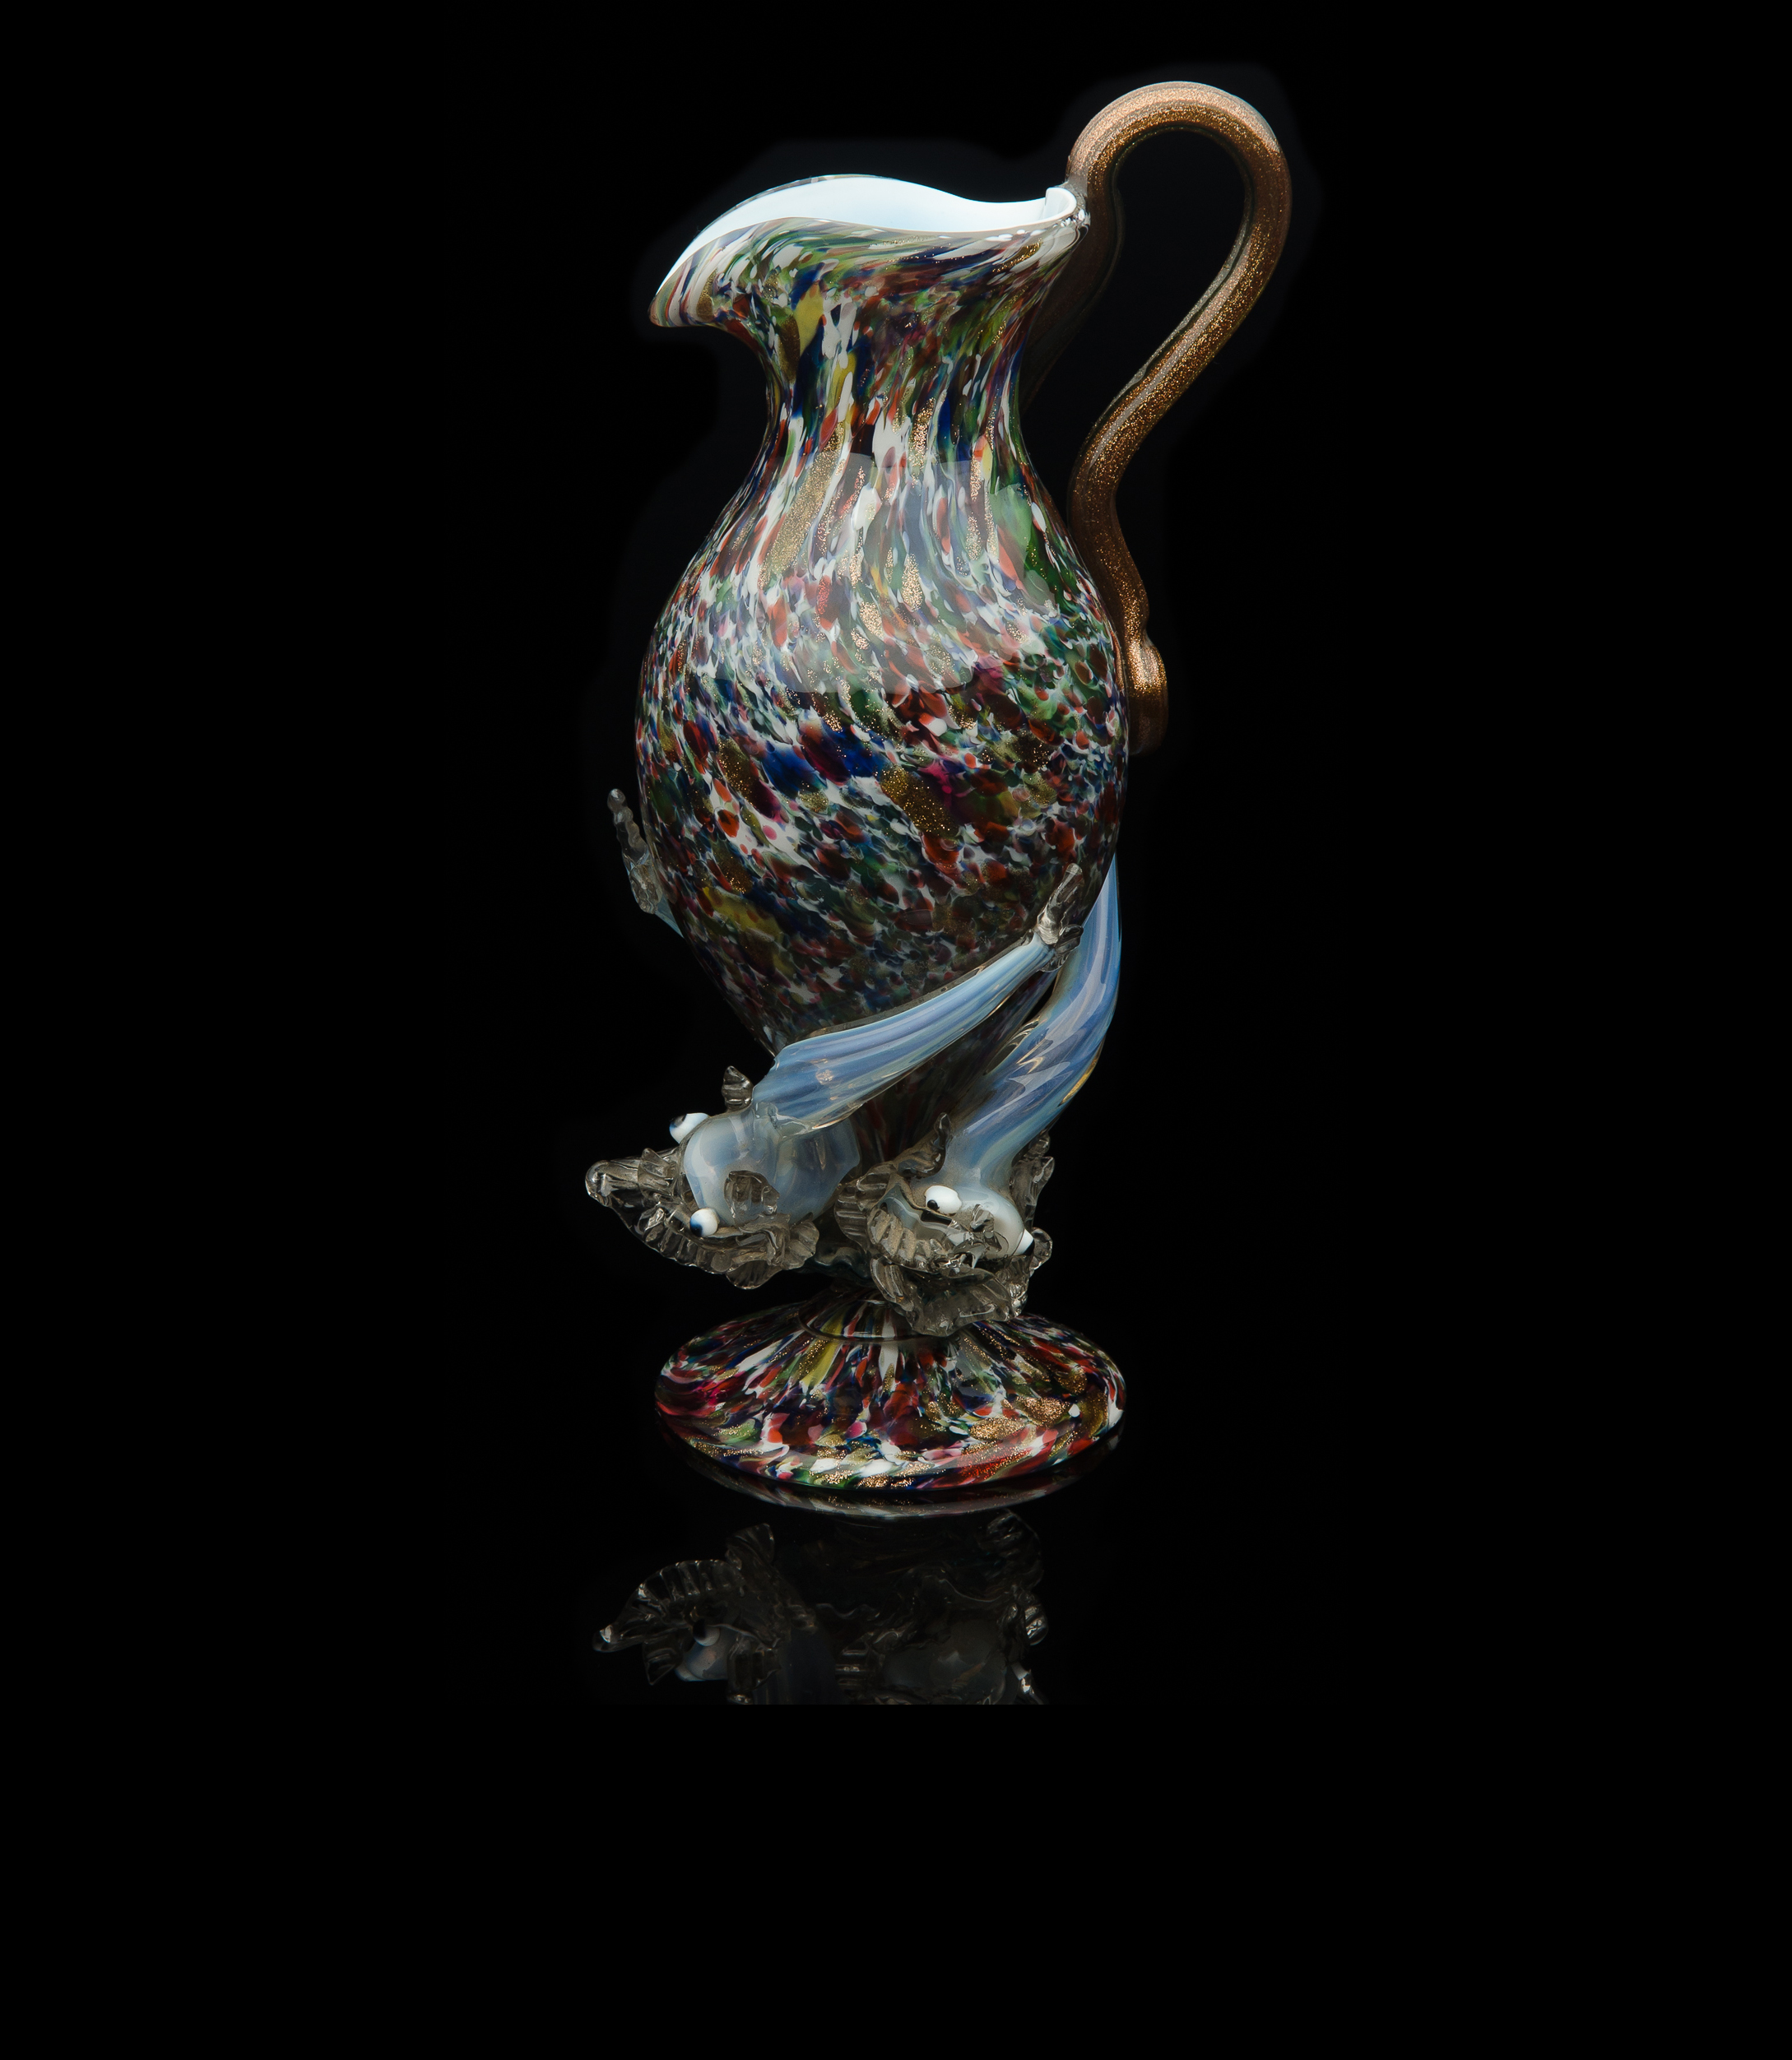  Salviati and Company,&nbsp; Multi-colored Pitcher with Serpent Handle and Three Opal Dolphins&nbsp; (circa 1875, glass), VV.207 